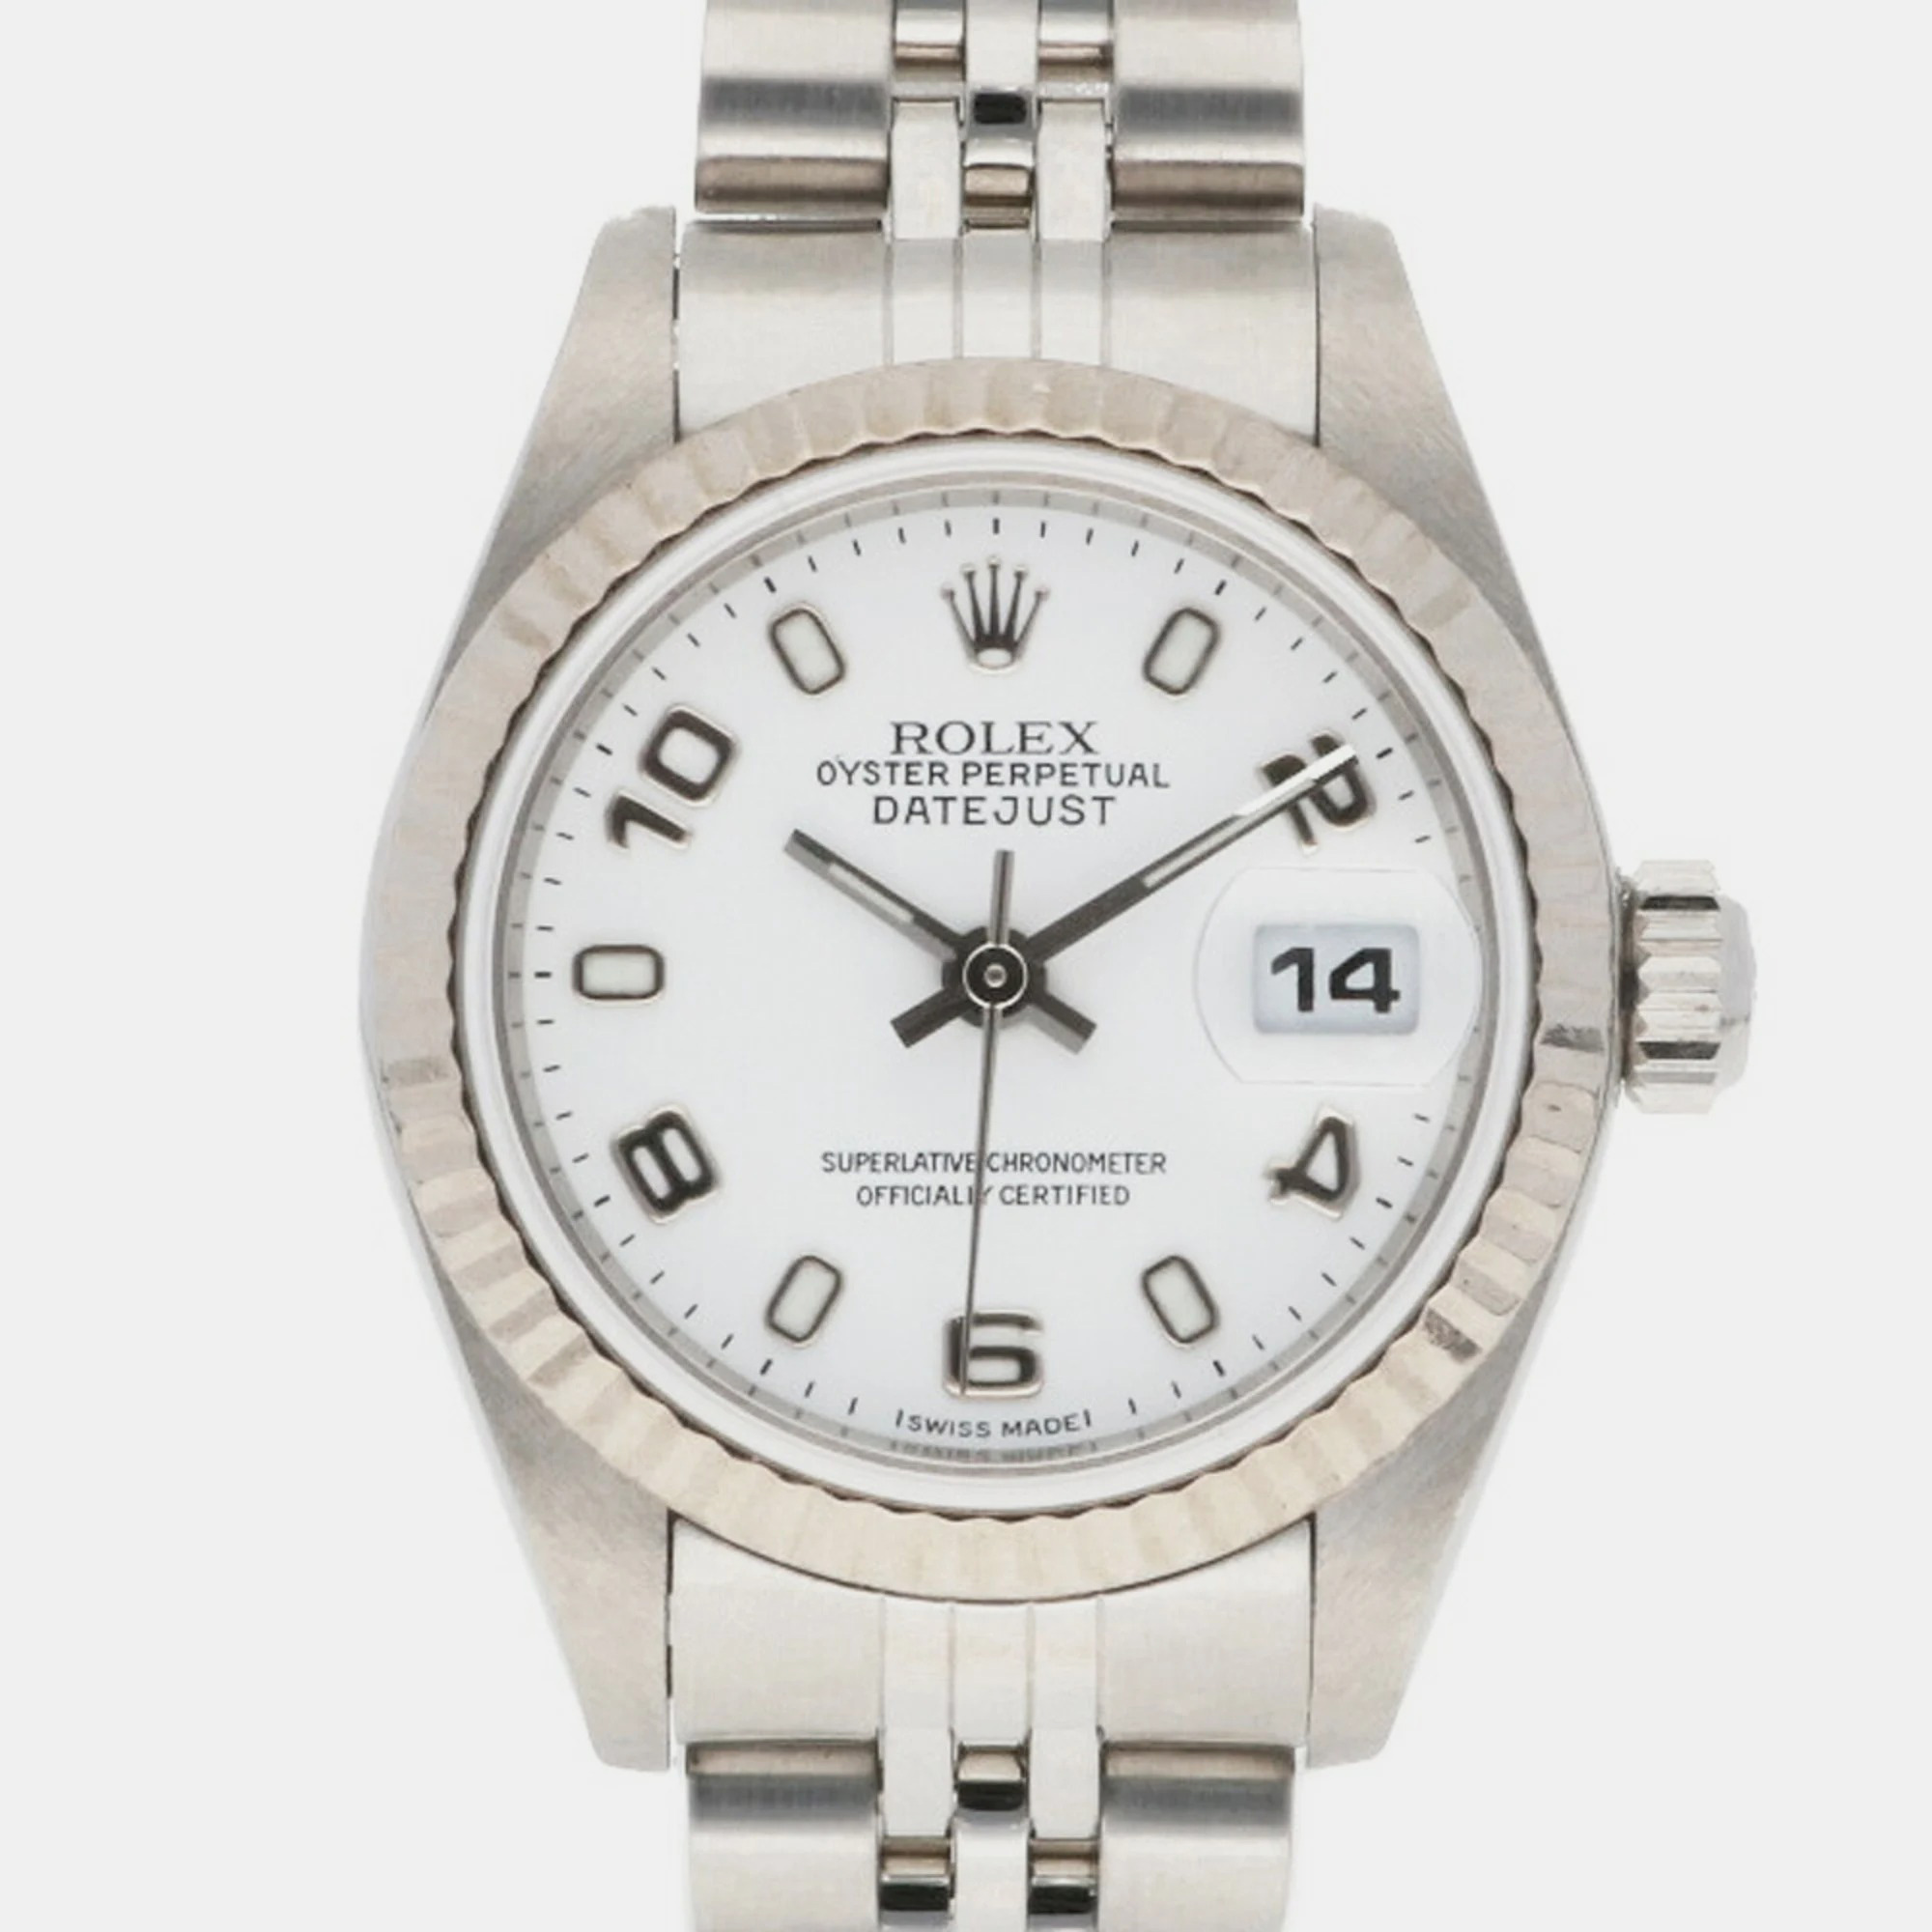 Rolex White 18K White Gold Stainless Steel Datejust 79174 Automatic Women's Wristwatch 26 Mm